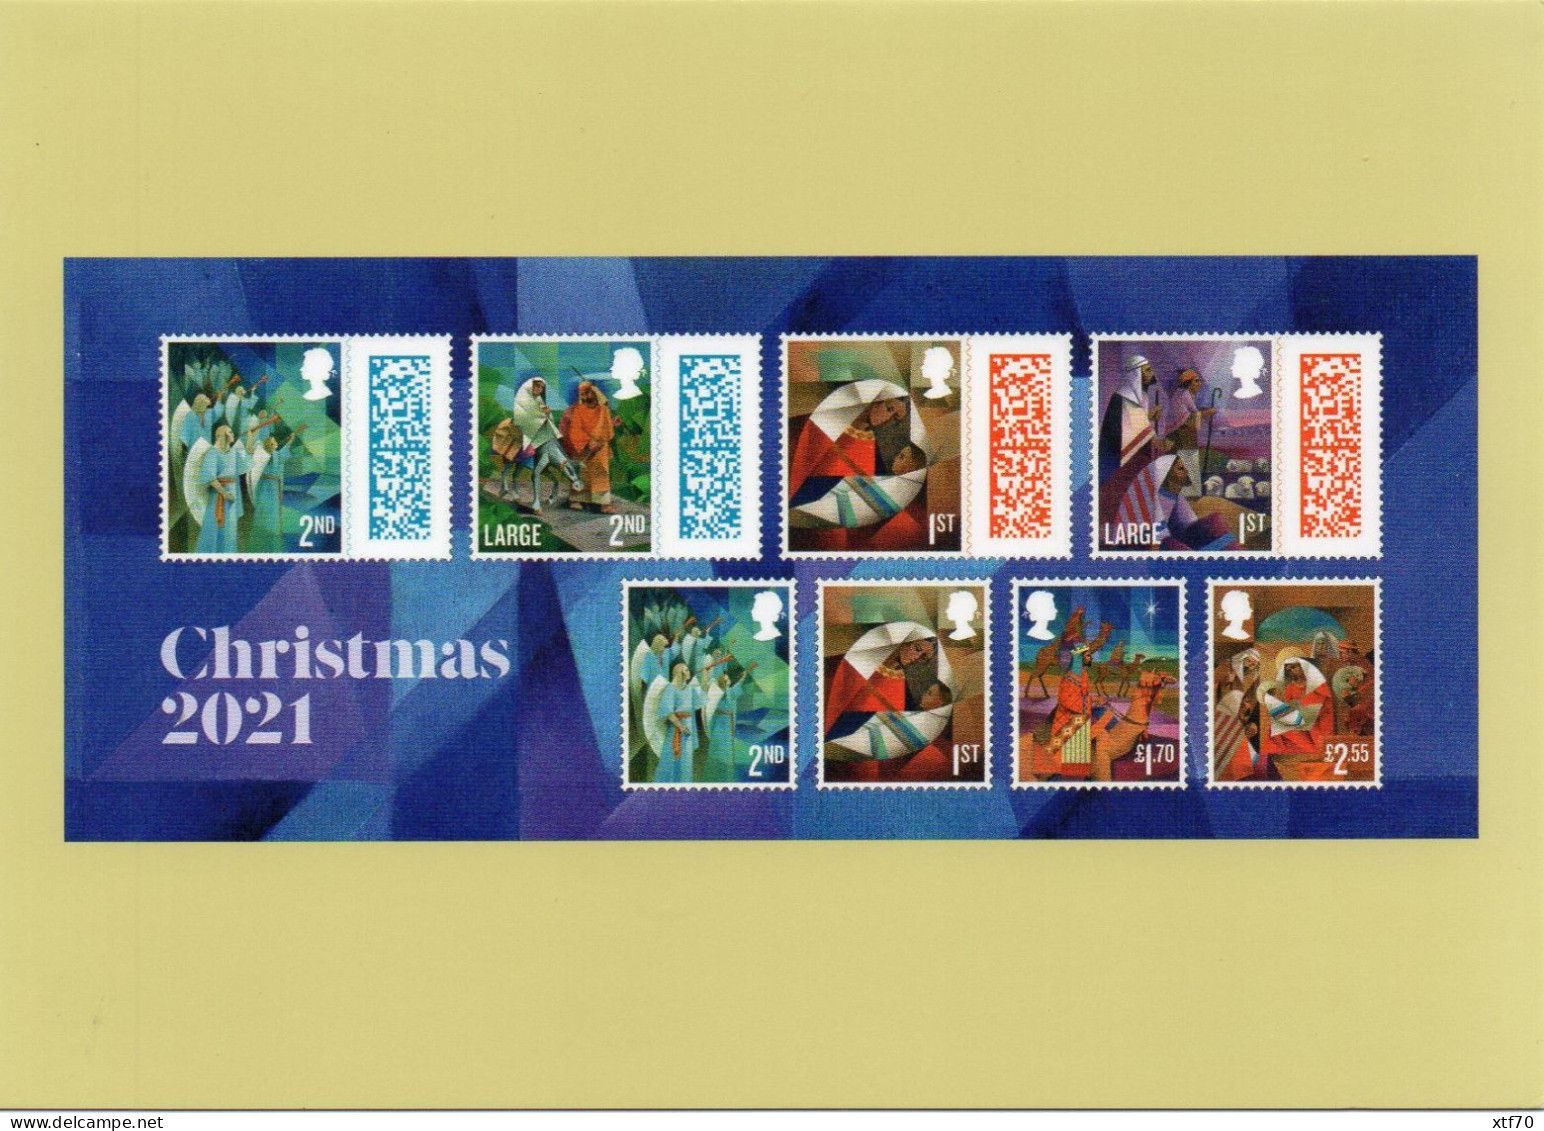 GREAT BRITAIN 2021 Christmas mint PHQ cards